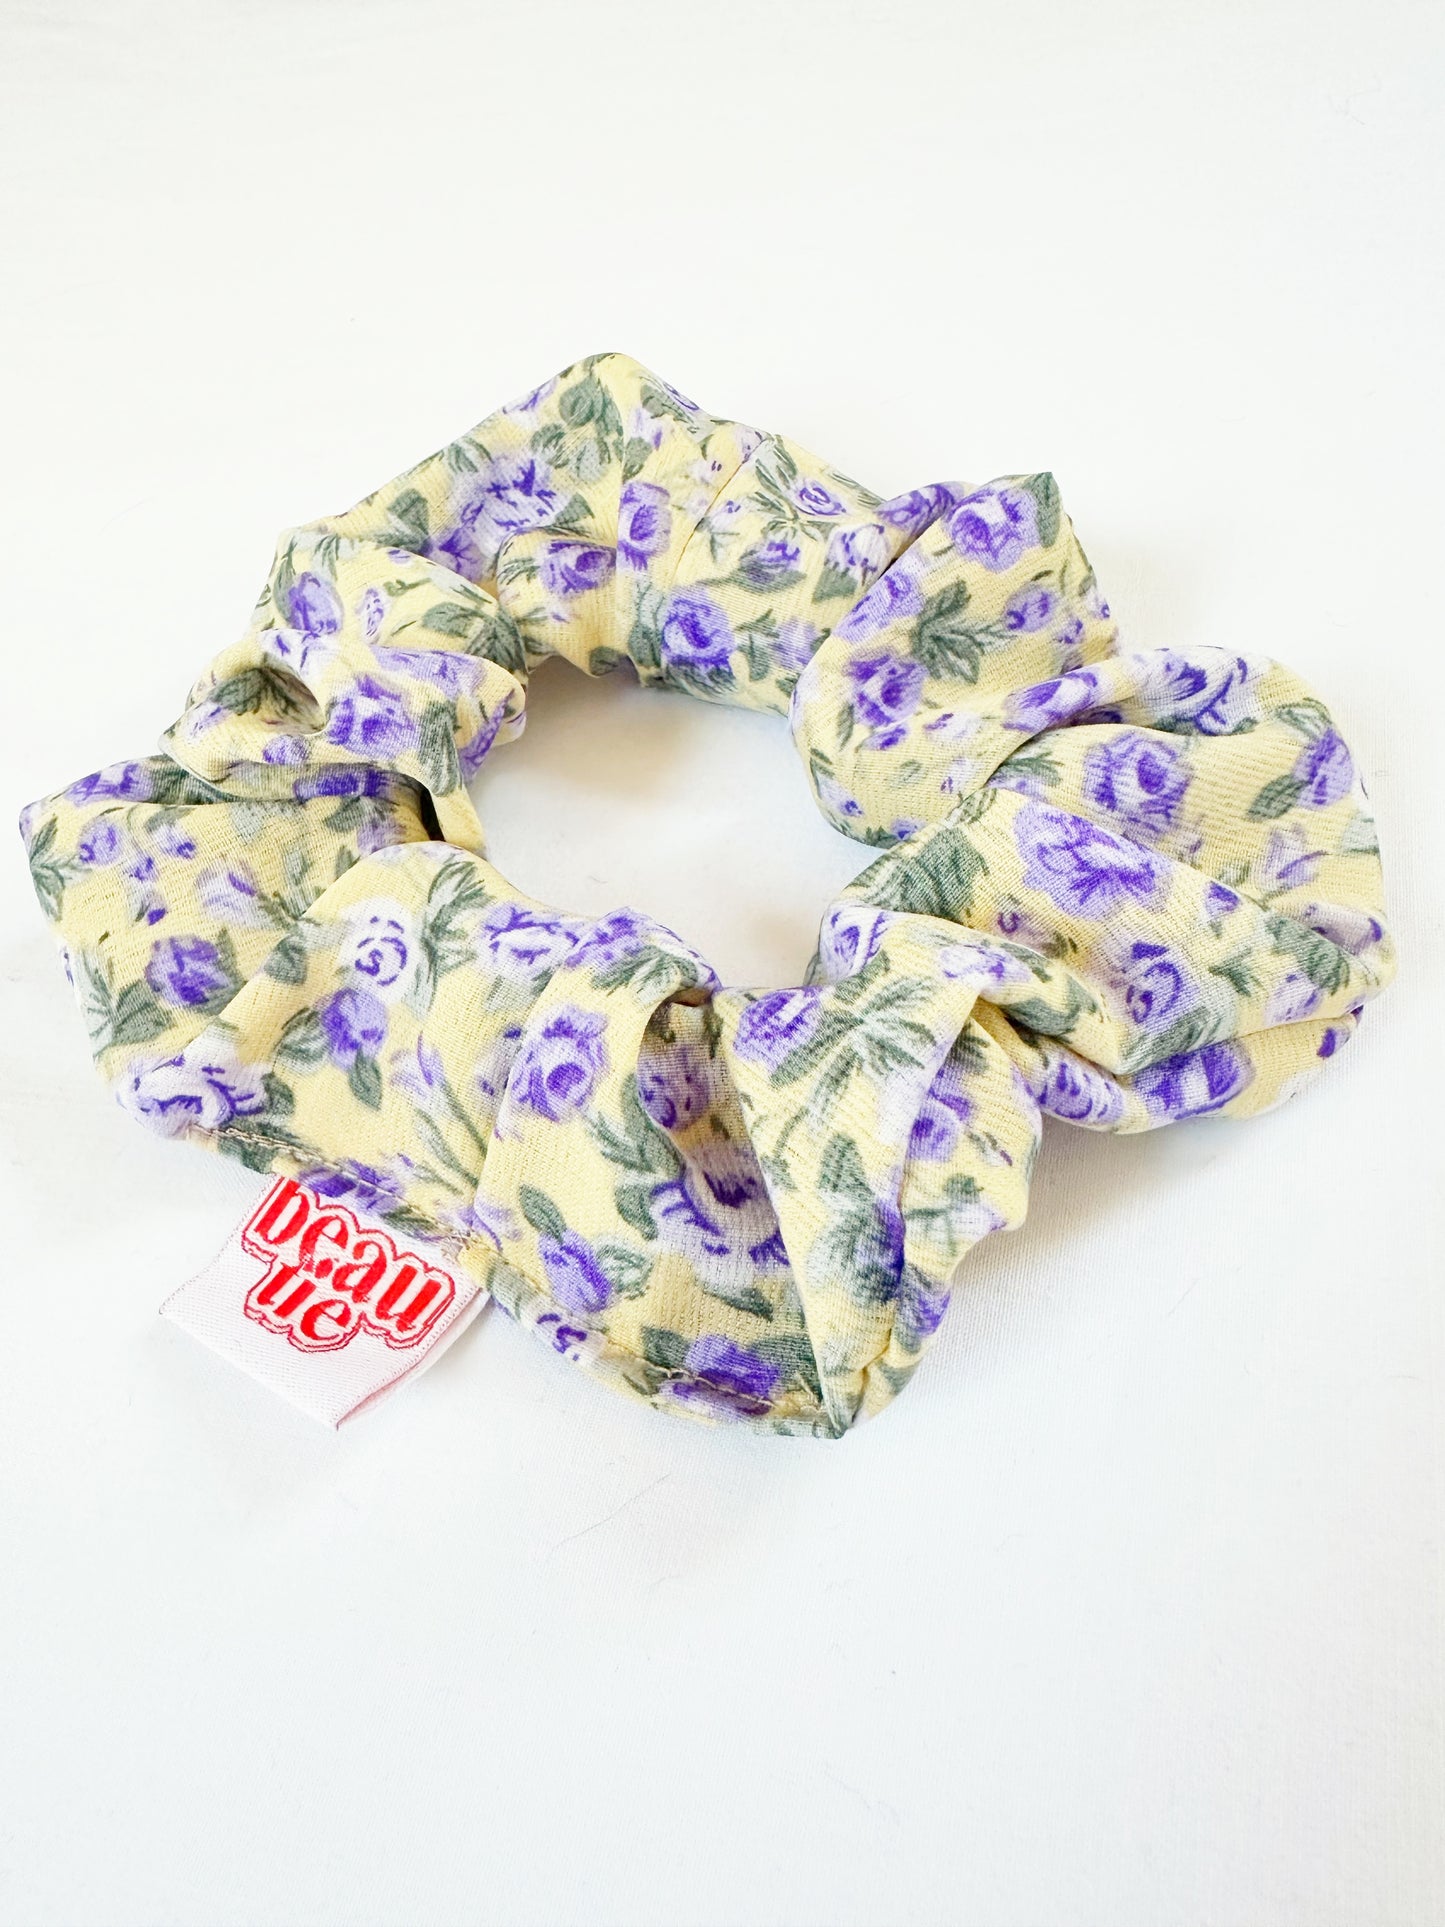 OG scrunchie in lilac and yellow rose print